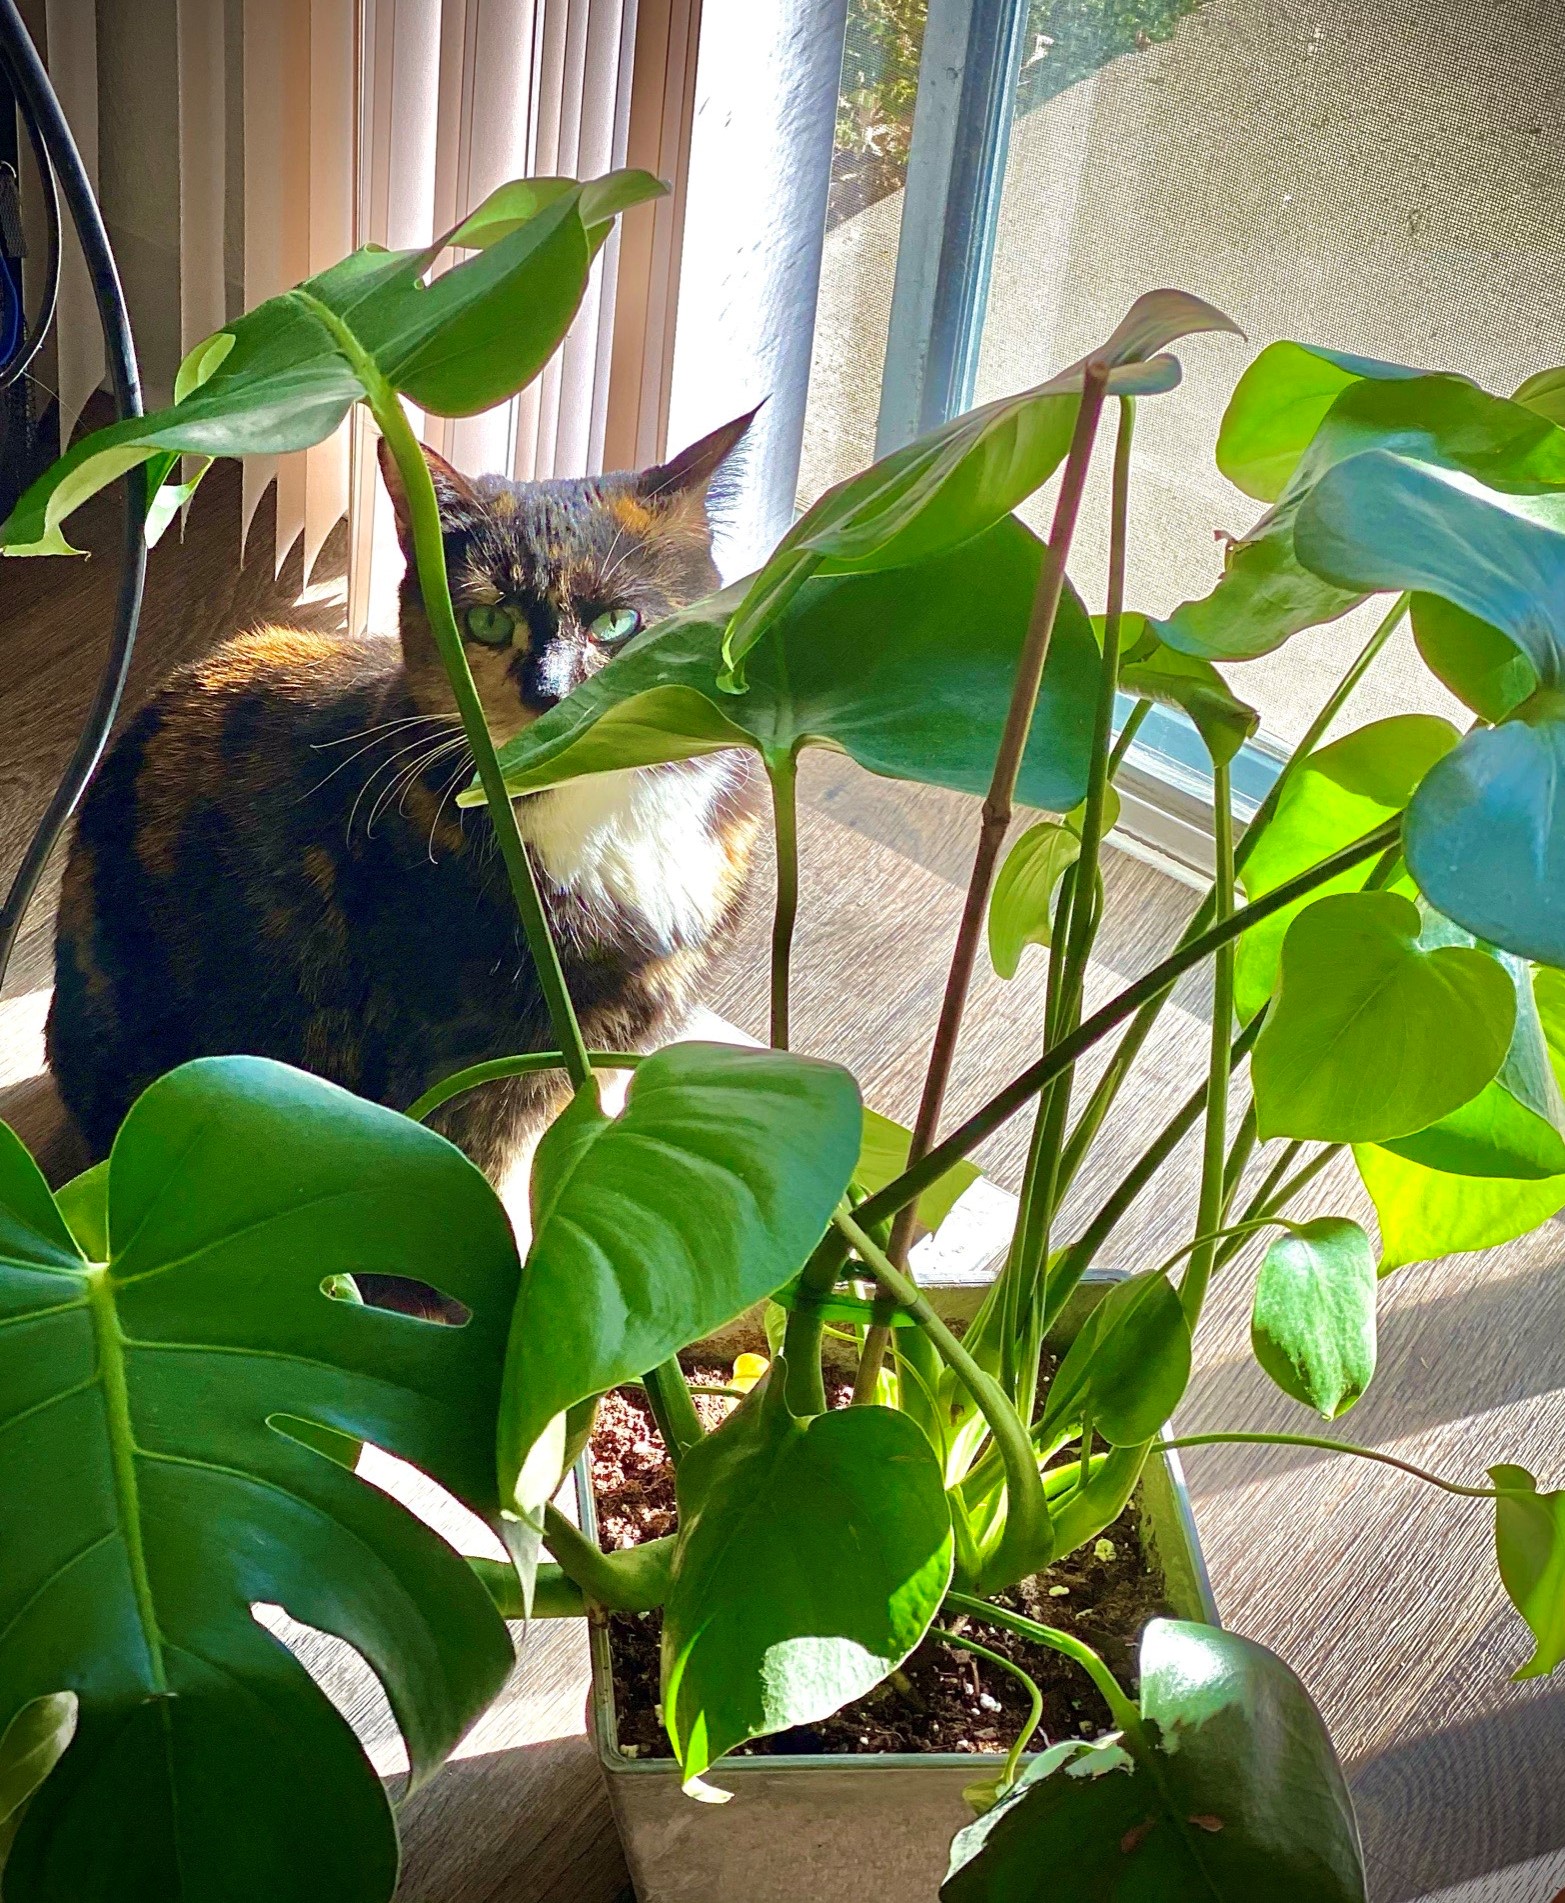 Photo of an orange and black cat with bright green eyes, hiding behind the large green leaves of a houseplant that sits in a large container on the floor.